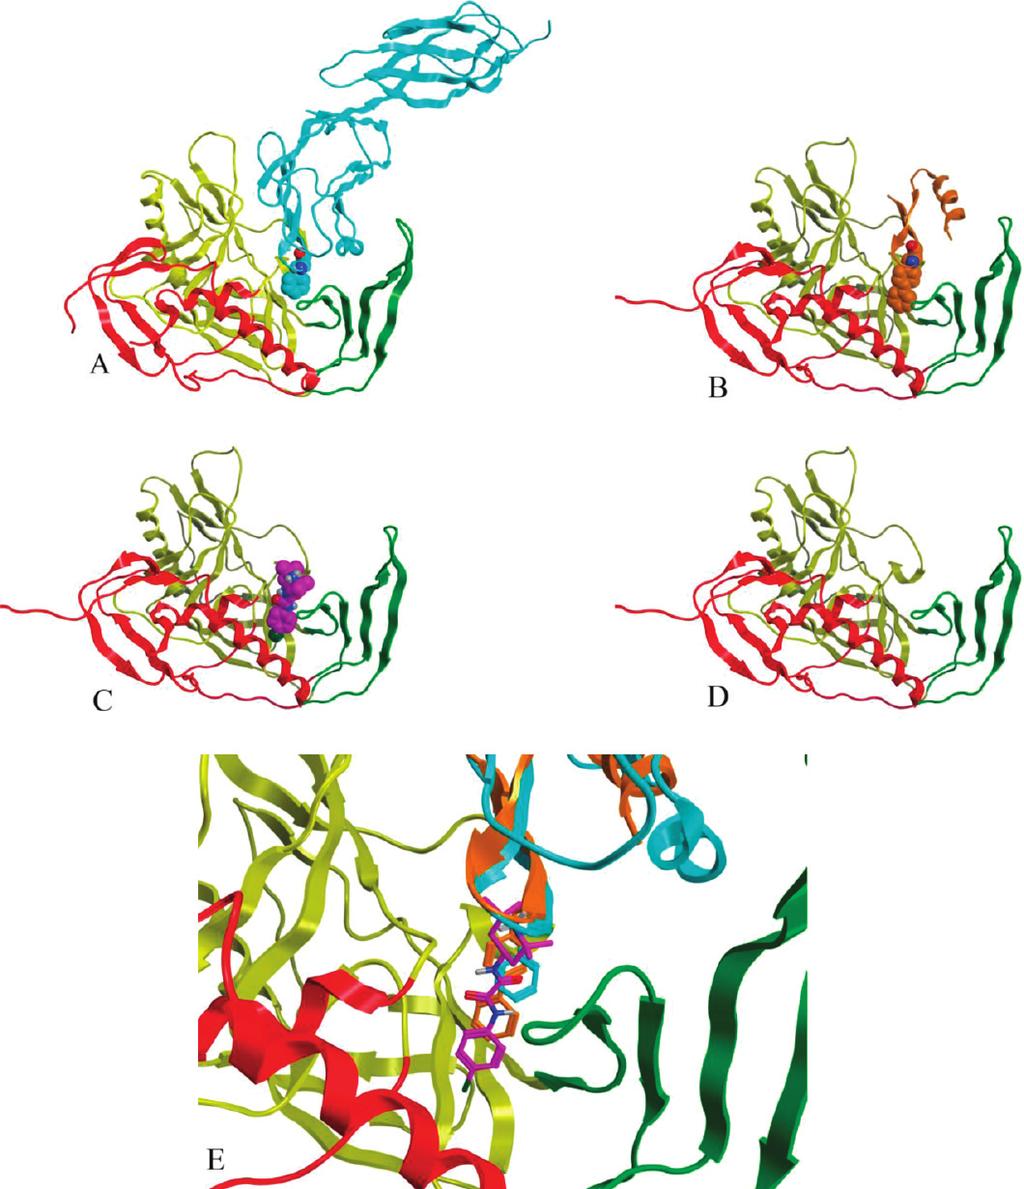 Figure 2. The four constructs used in MD simulation are shown in panels A D with the three gp120 domains: inner, outer, and bridging sheet colored as red, yellow, and green ribbons, respectively.